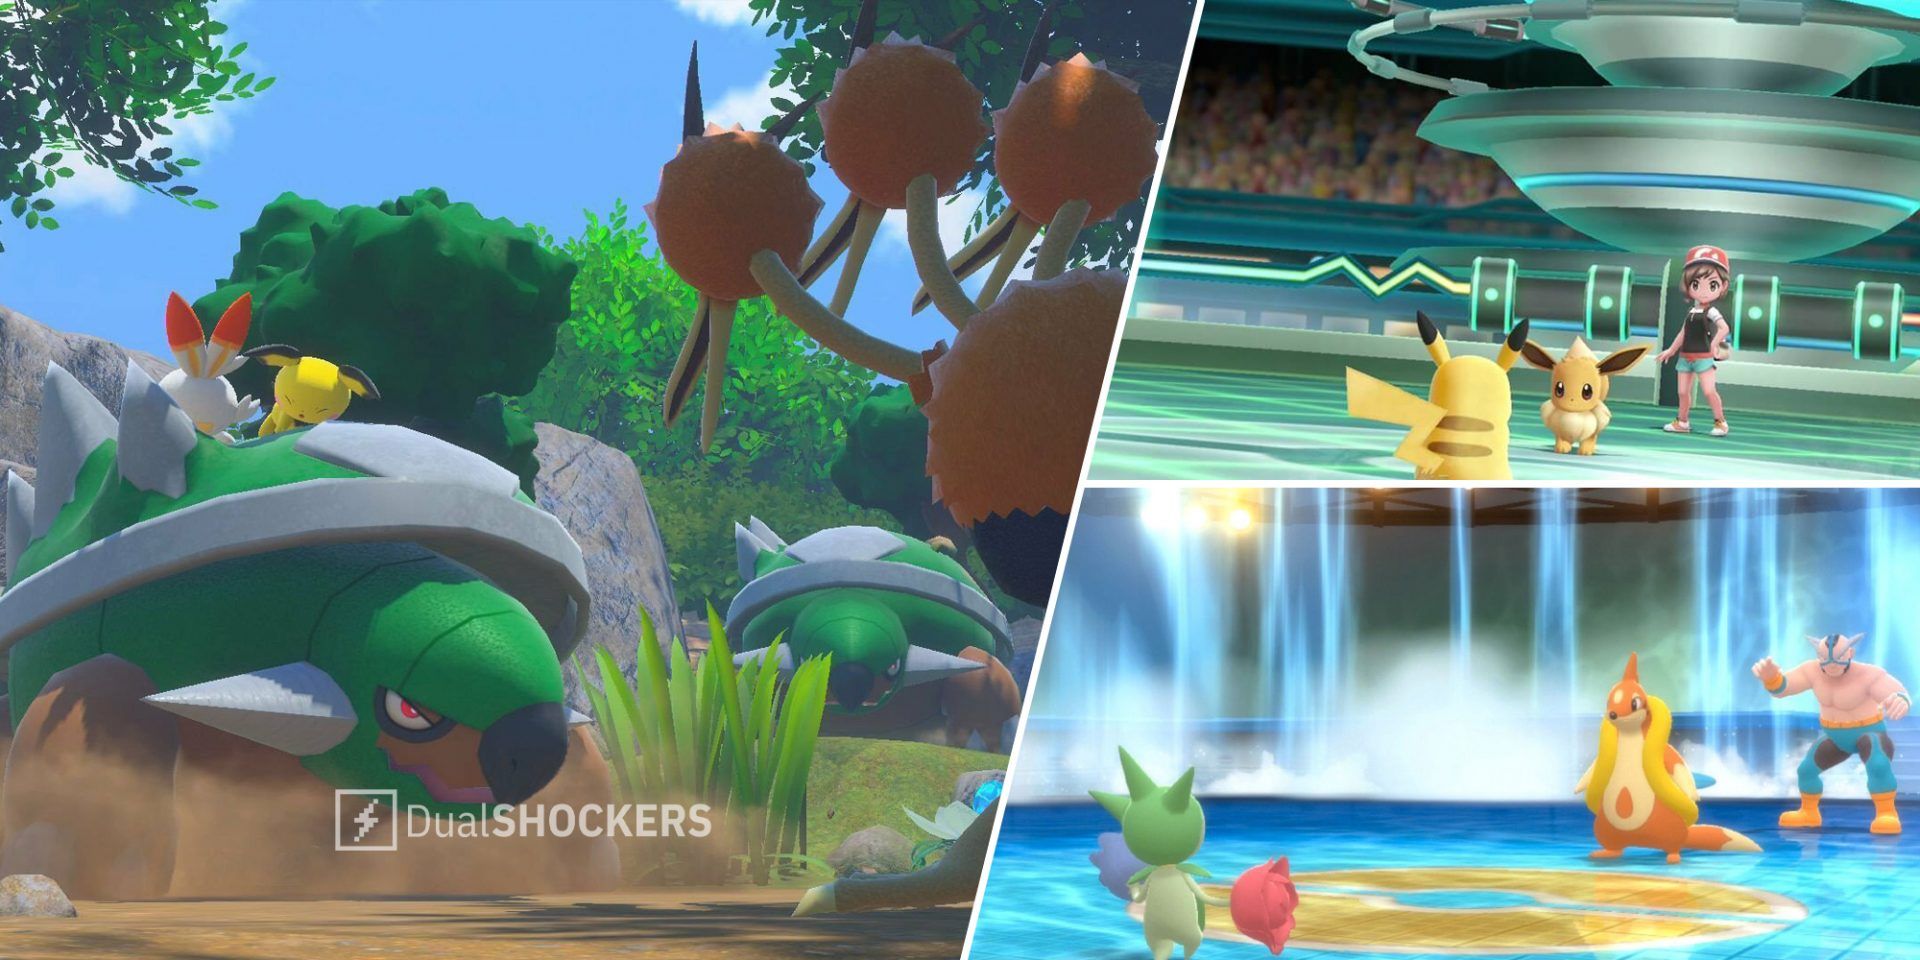 Pokemon battle with Torterra, Scorbunny, Pichu, and Doduo on left, Pokemon trainer battle with Pikachu and Eevee on top right, Pokemon battle with Roselia and Buizel on bottom right